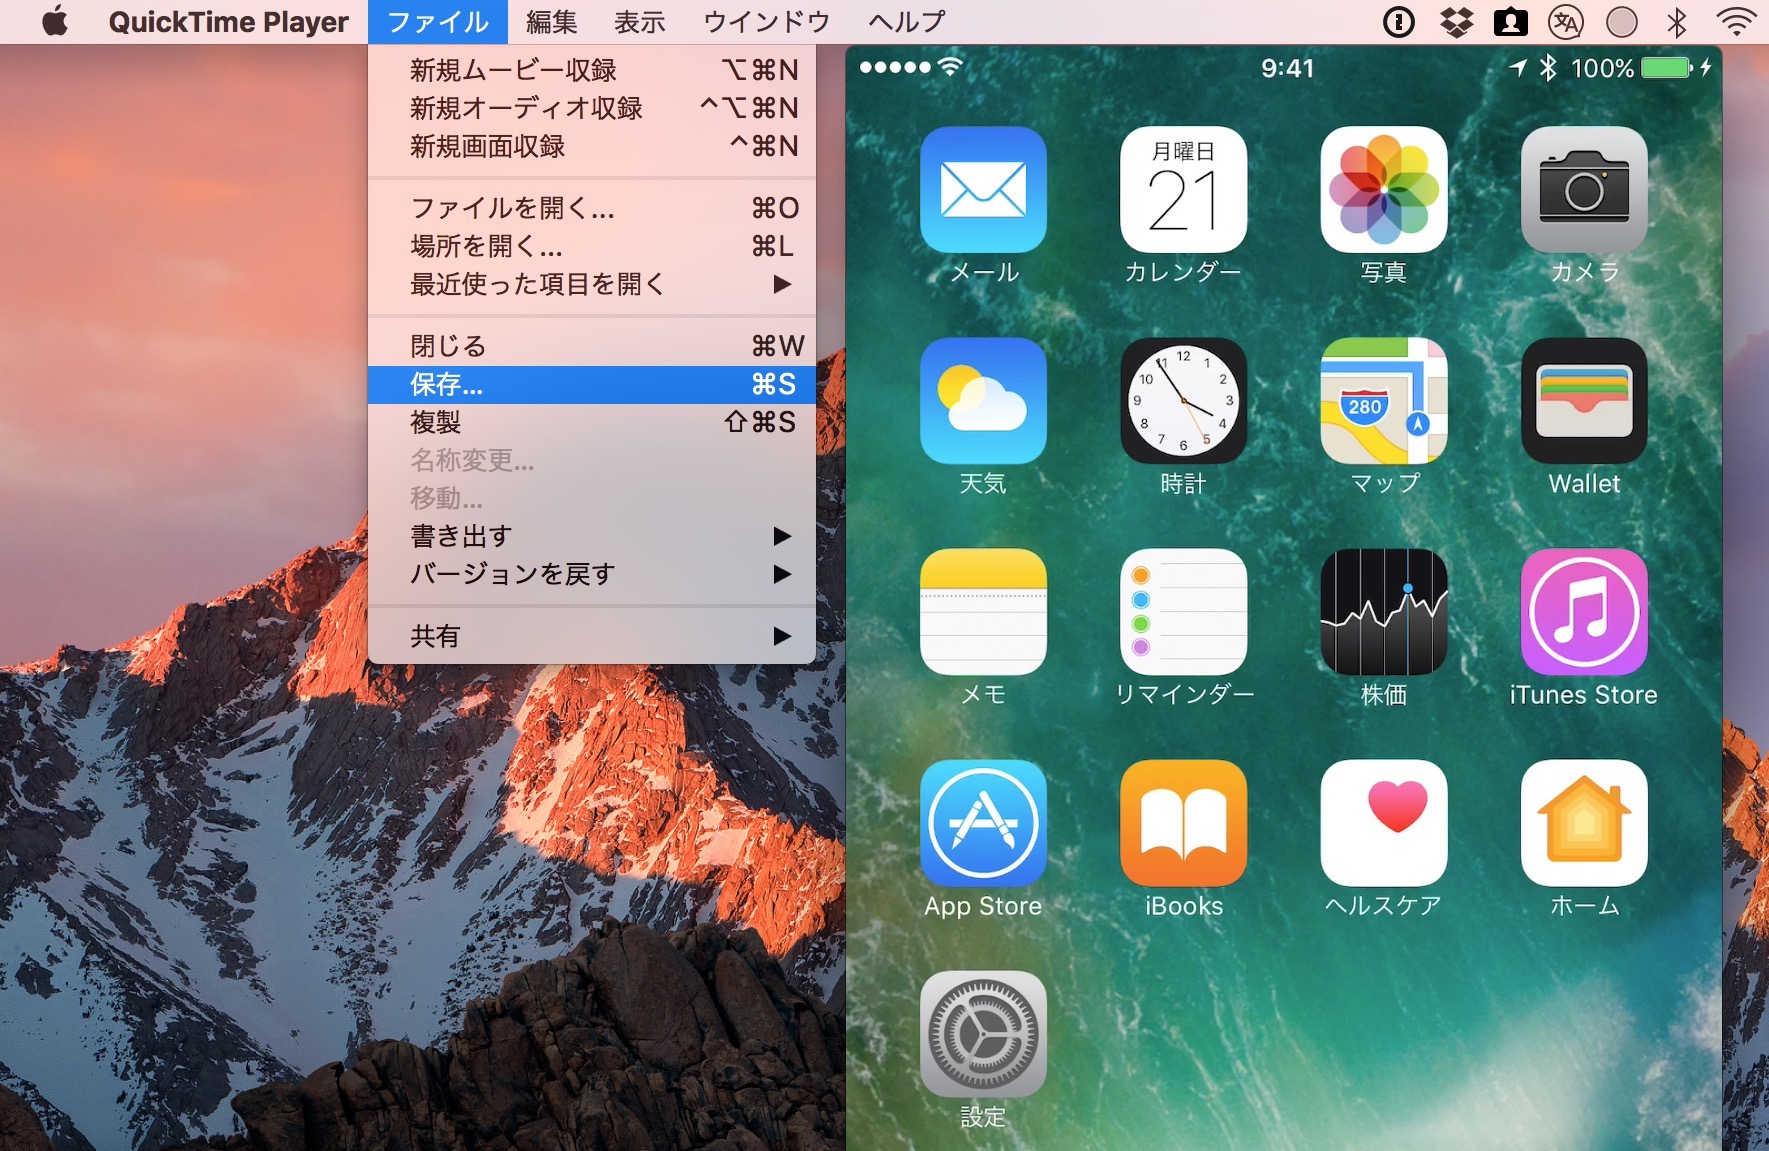 iPhoneをMac（QuickTime Player）で録画する方法